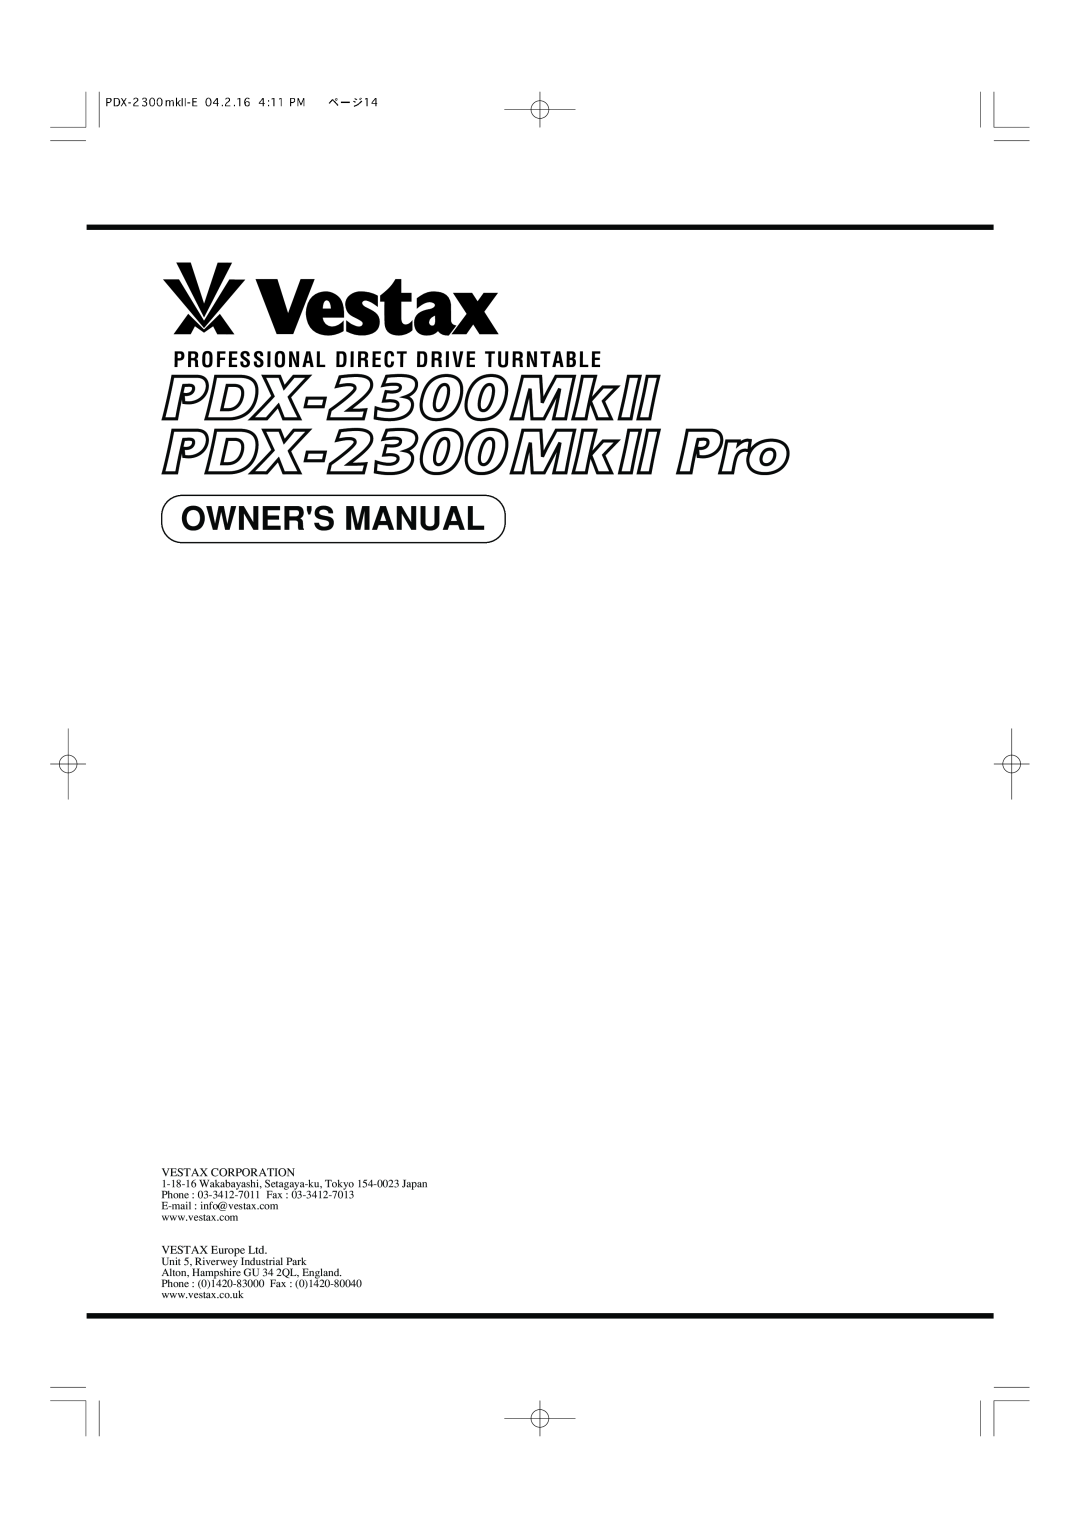 Vestax PDX-2300MkII, PDX-2300MkII Pro owner manual Professional Direct Drive Turntable, Vestax Corporation 